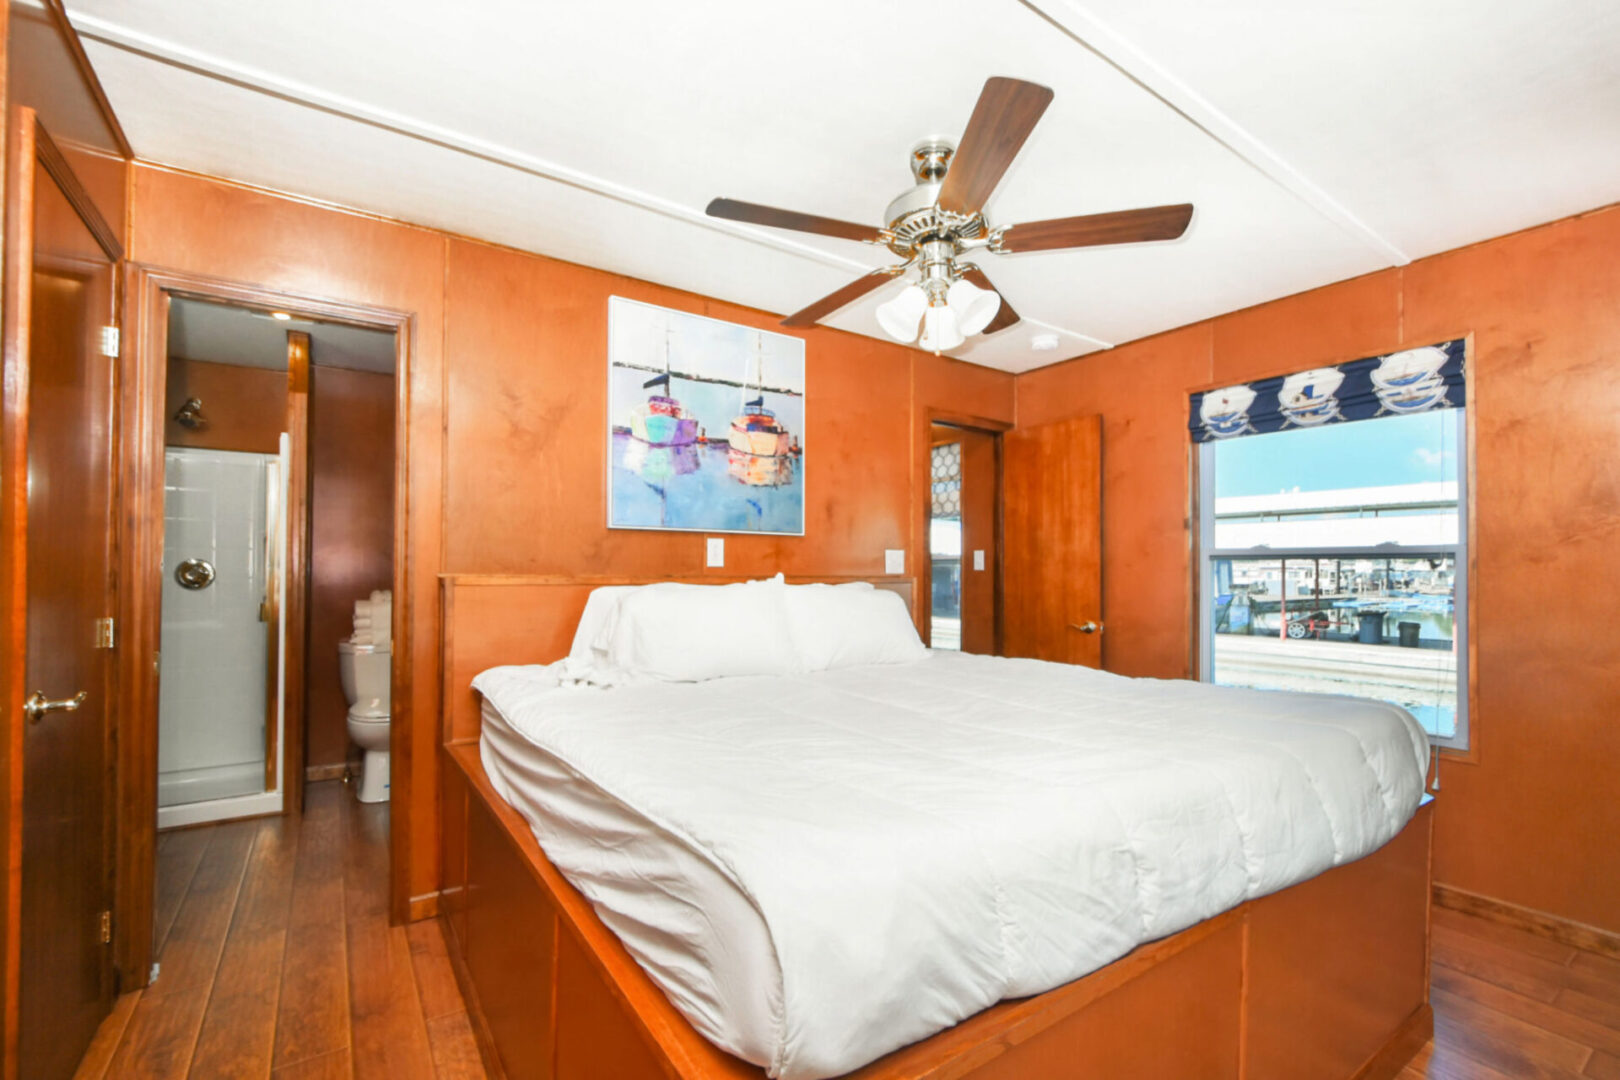 Boat artwork above the brown bedframe of a white bed inside a brown bedroom with a bathroom on to the left side